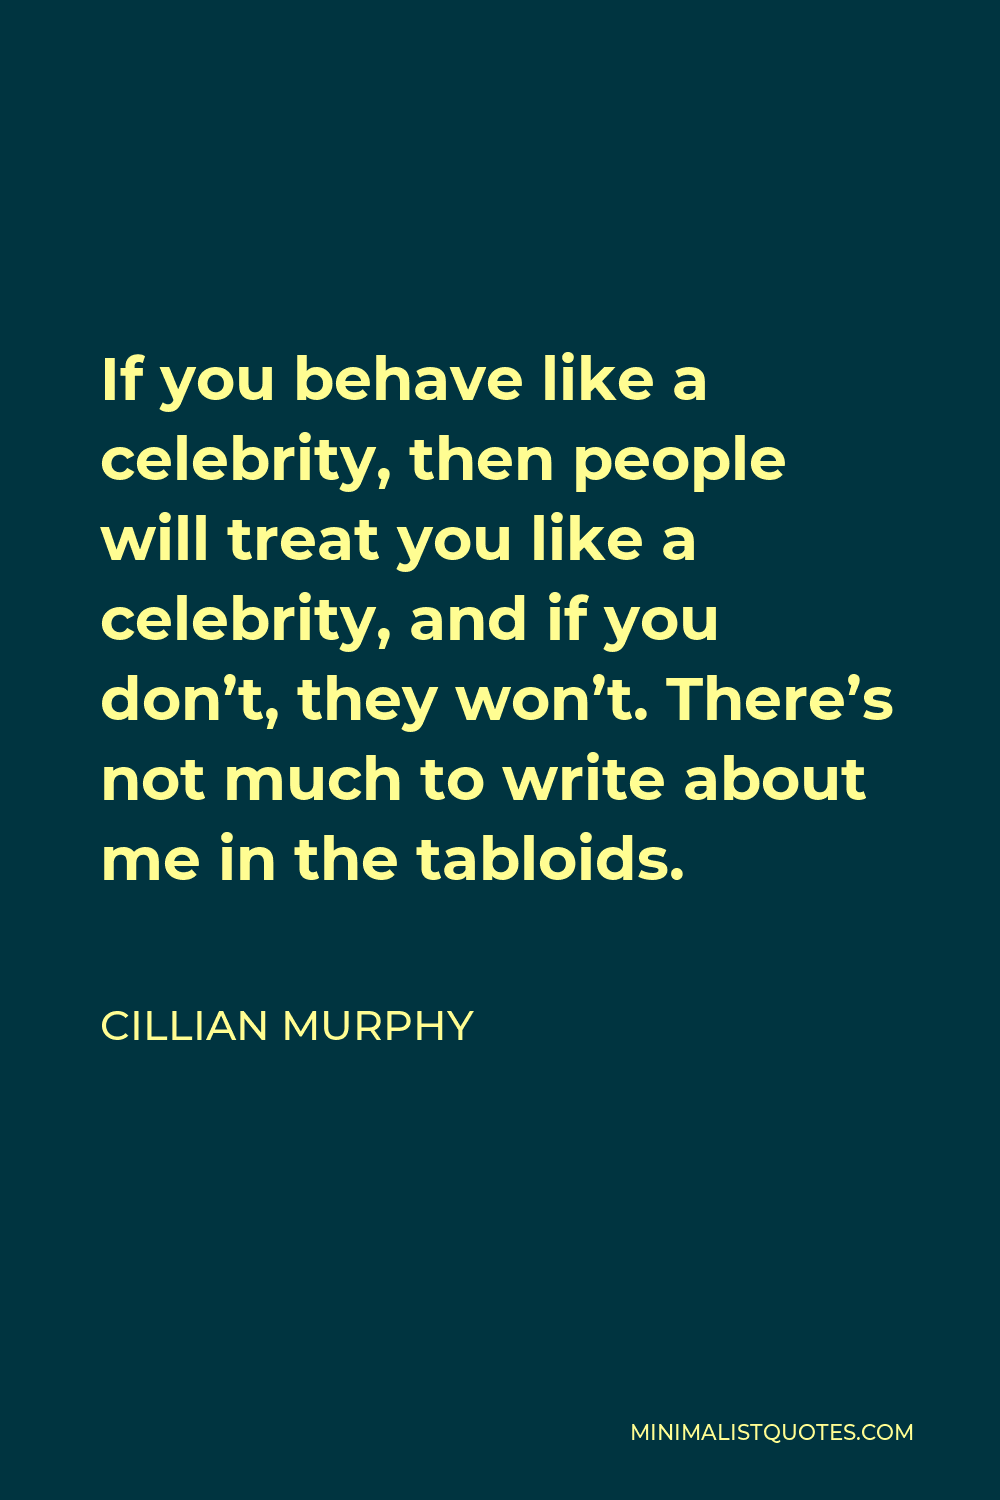 Cillian Murphy Quote - If you behave like a celebrity, then people will treat you like a celebrity, and if you don’t, they won’t. There’s not much to write about me in the tabloids.